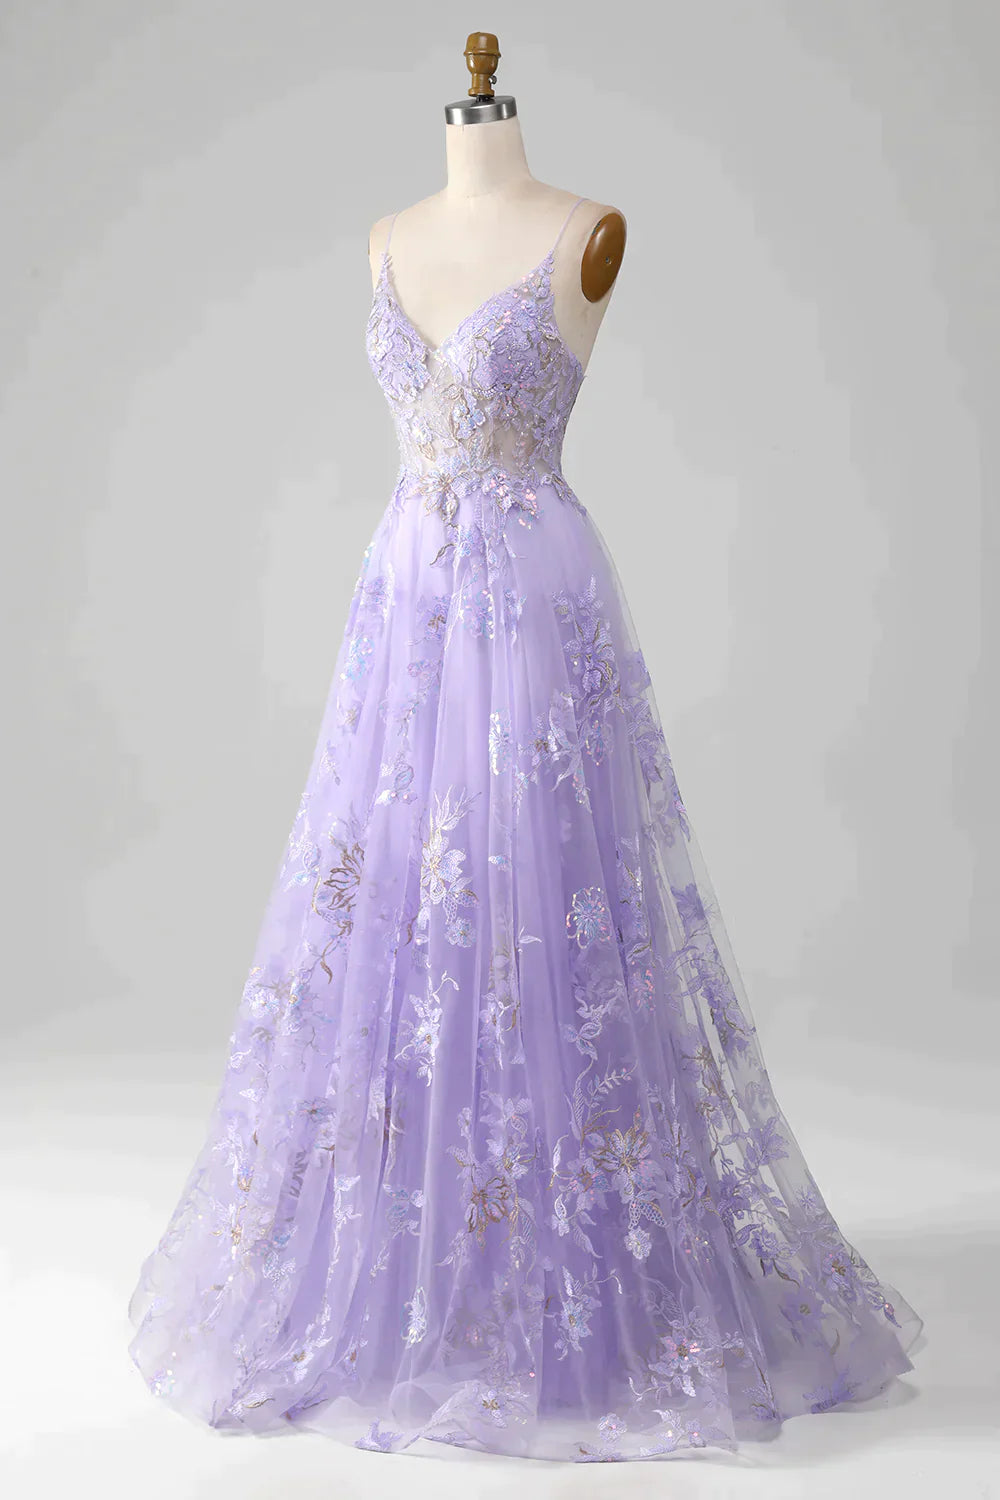 Bridesmaid Dress 2049, Romantic Purple A Line Spaghetti Straps Long Tulle Prom Dress With Appliques